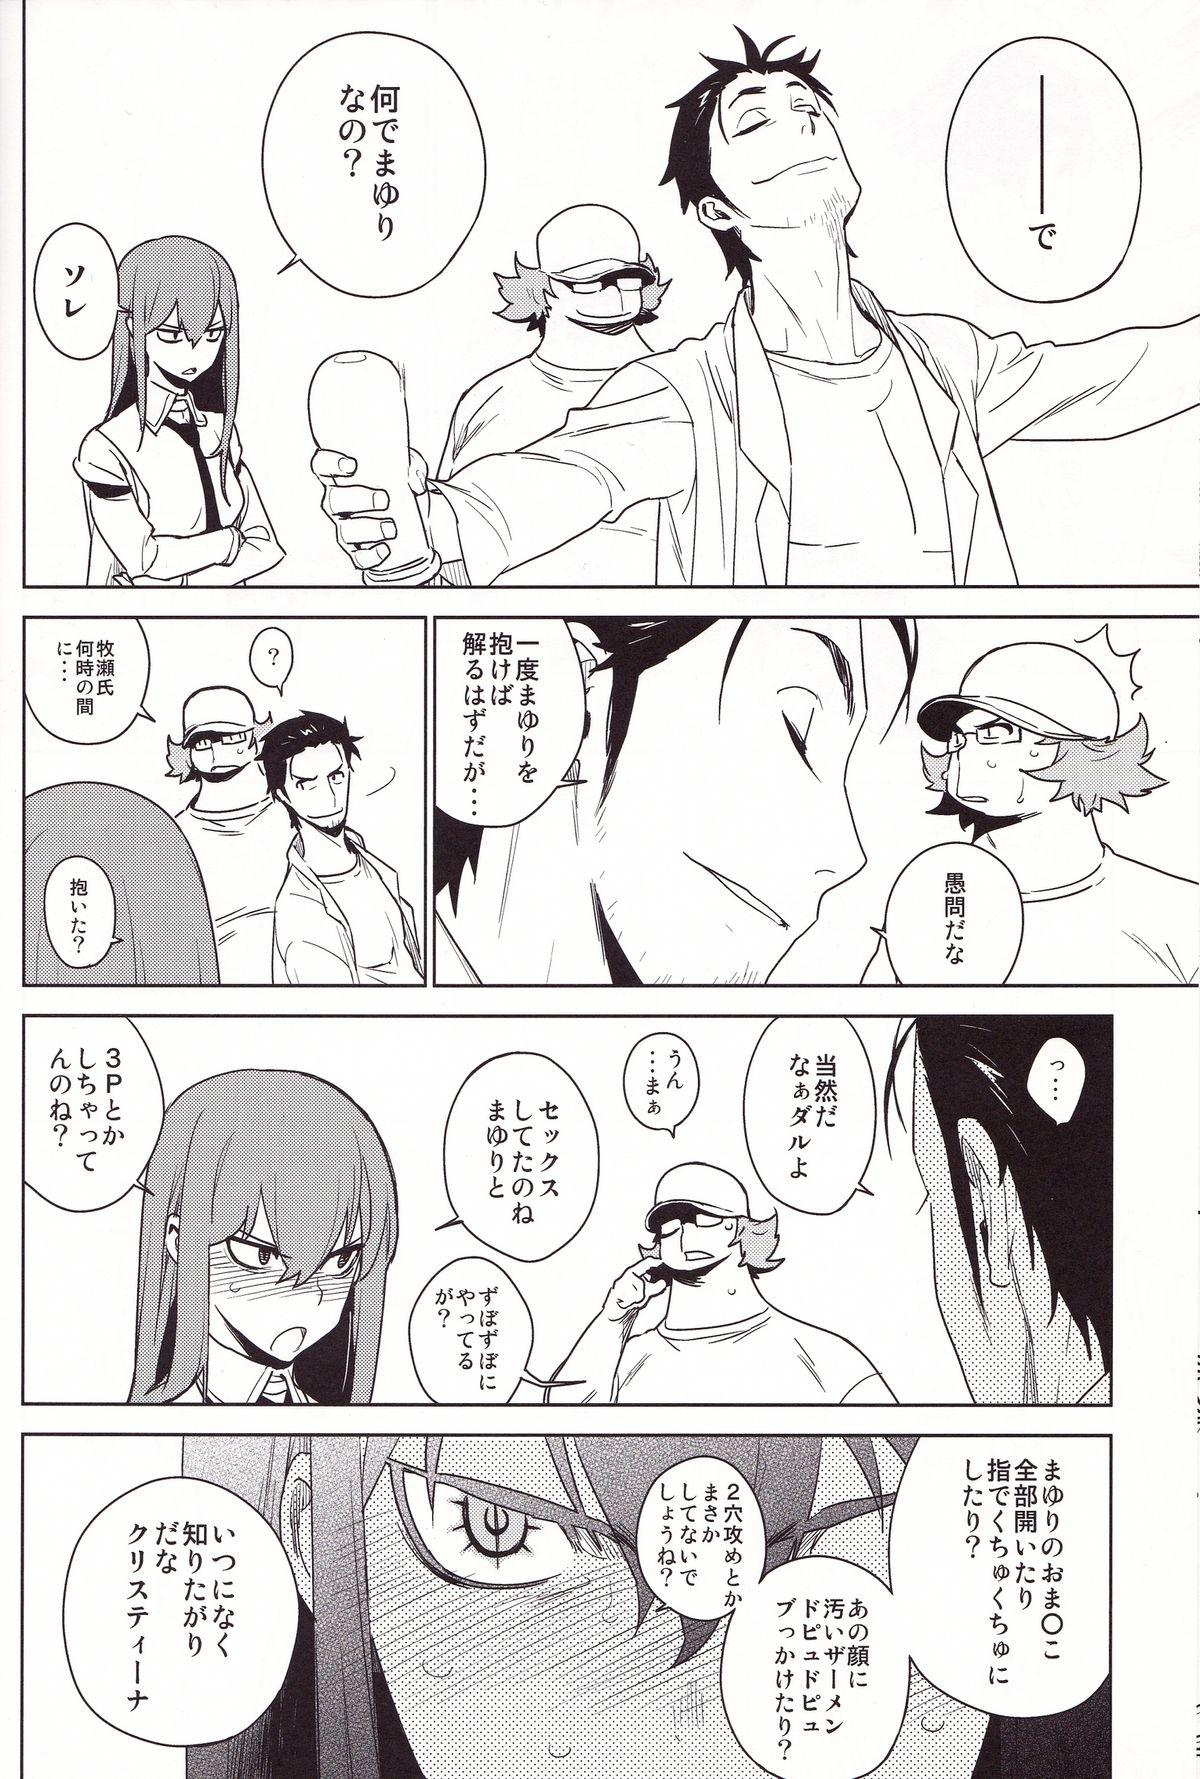 Anal Play OMD - Steinsgate Defloration - Page 10